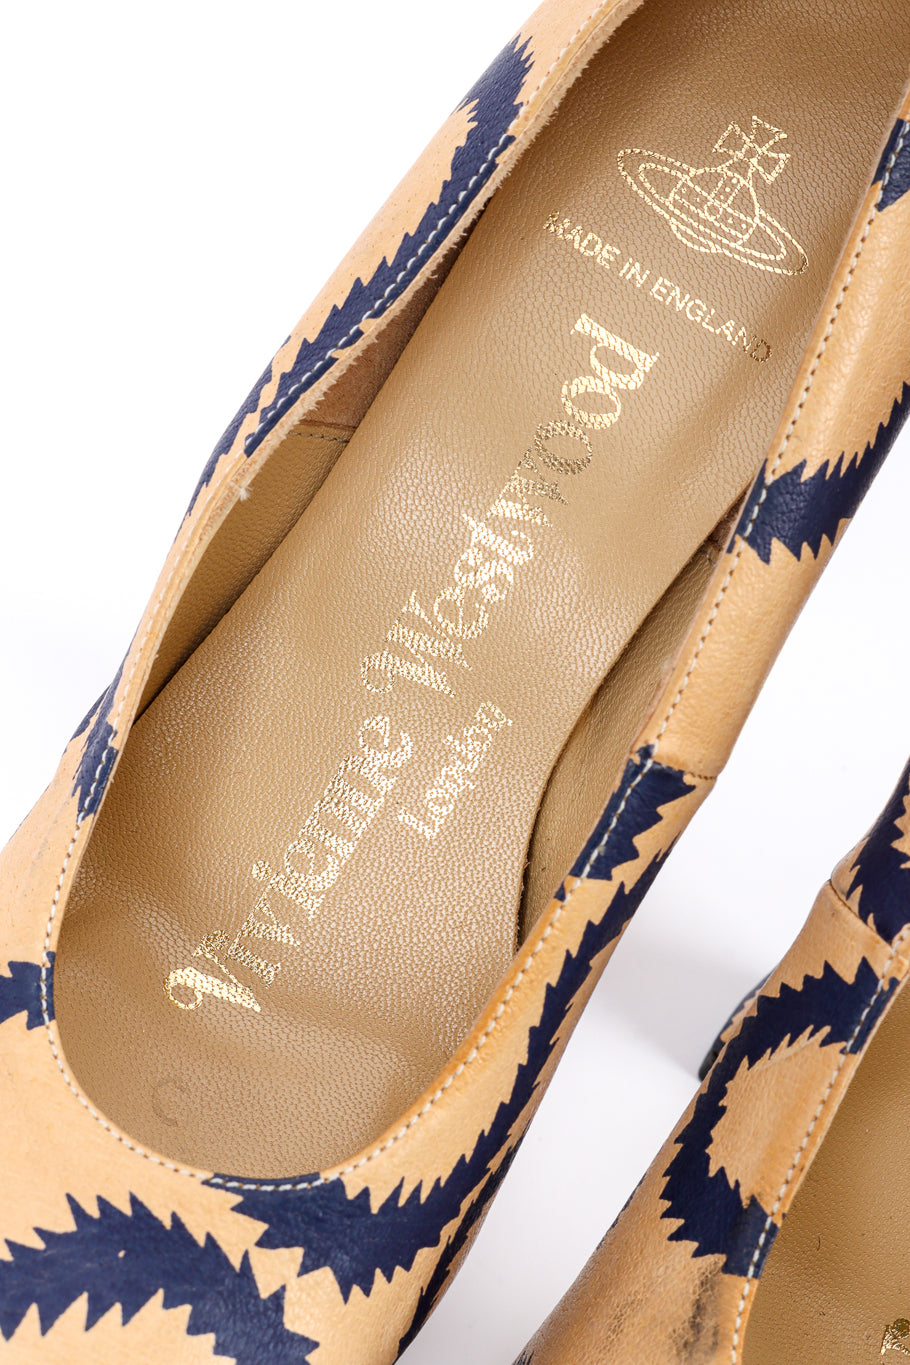 Vivienne Westwood 2013 F/W Squiggle Print Leather Court Shoe branded sole @recessla